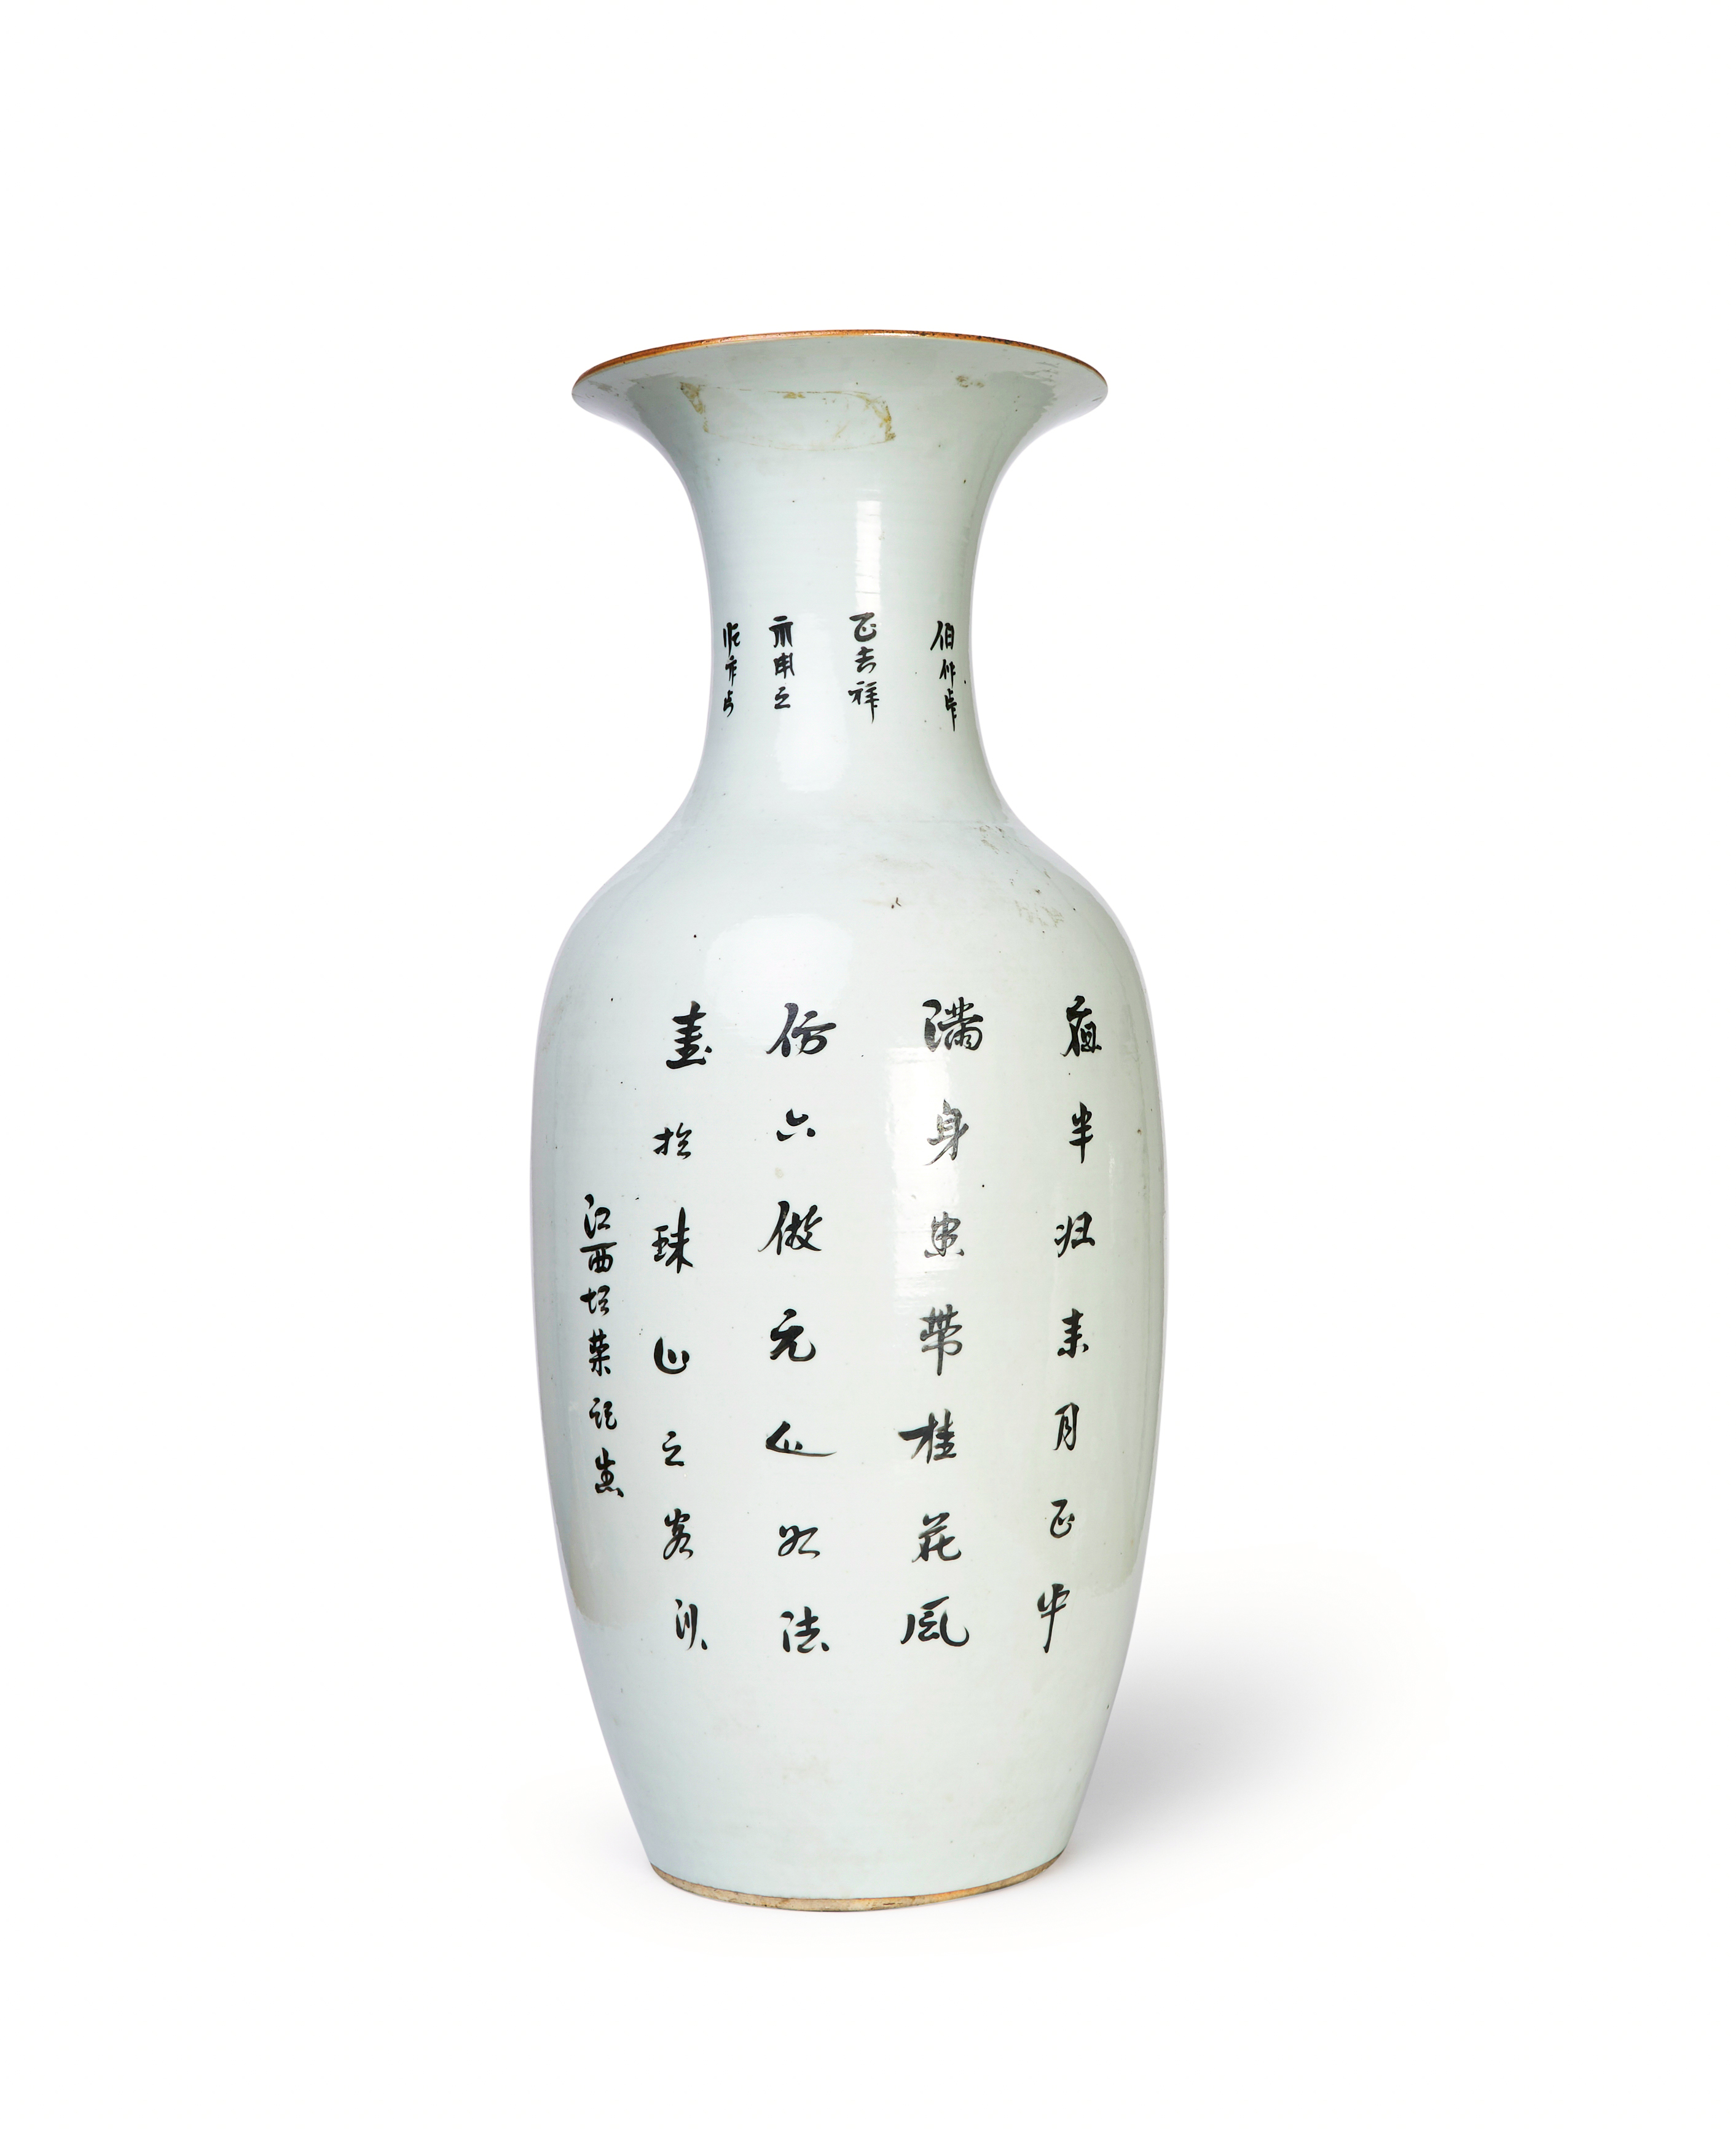 A LARGE CHINESE FAMILLE ROSE VASE, REPUBLIC PERIOD - Image 2 of 4